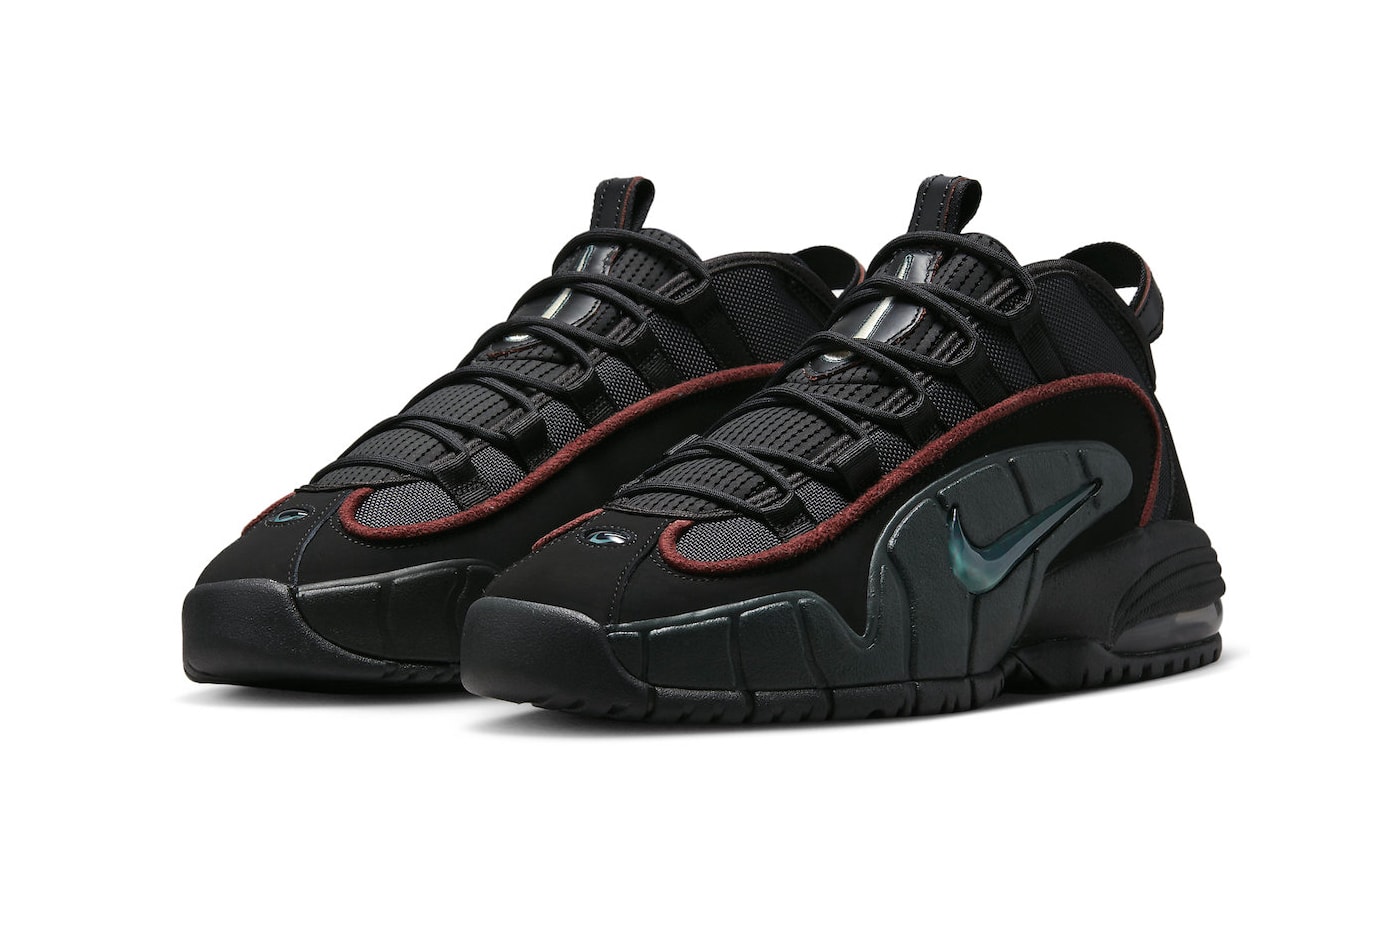 Nike Air Max Penny 1 Faded Spruce Official Look Release Info DV7442-001 Date Buy Price Black Anthracite Dark Pony Penny Hardaway